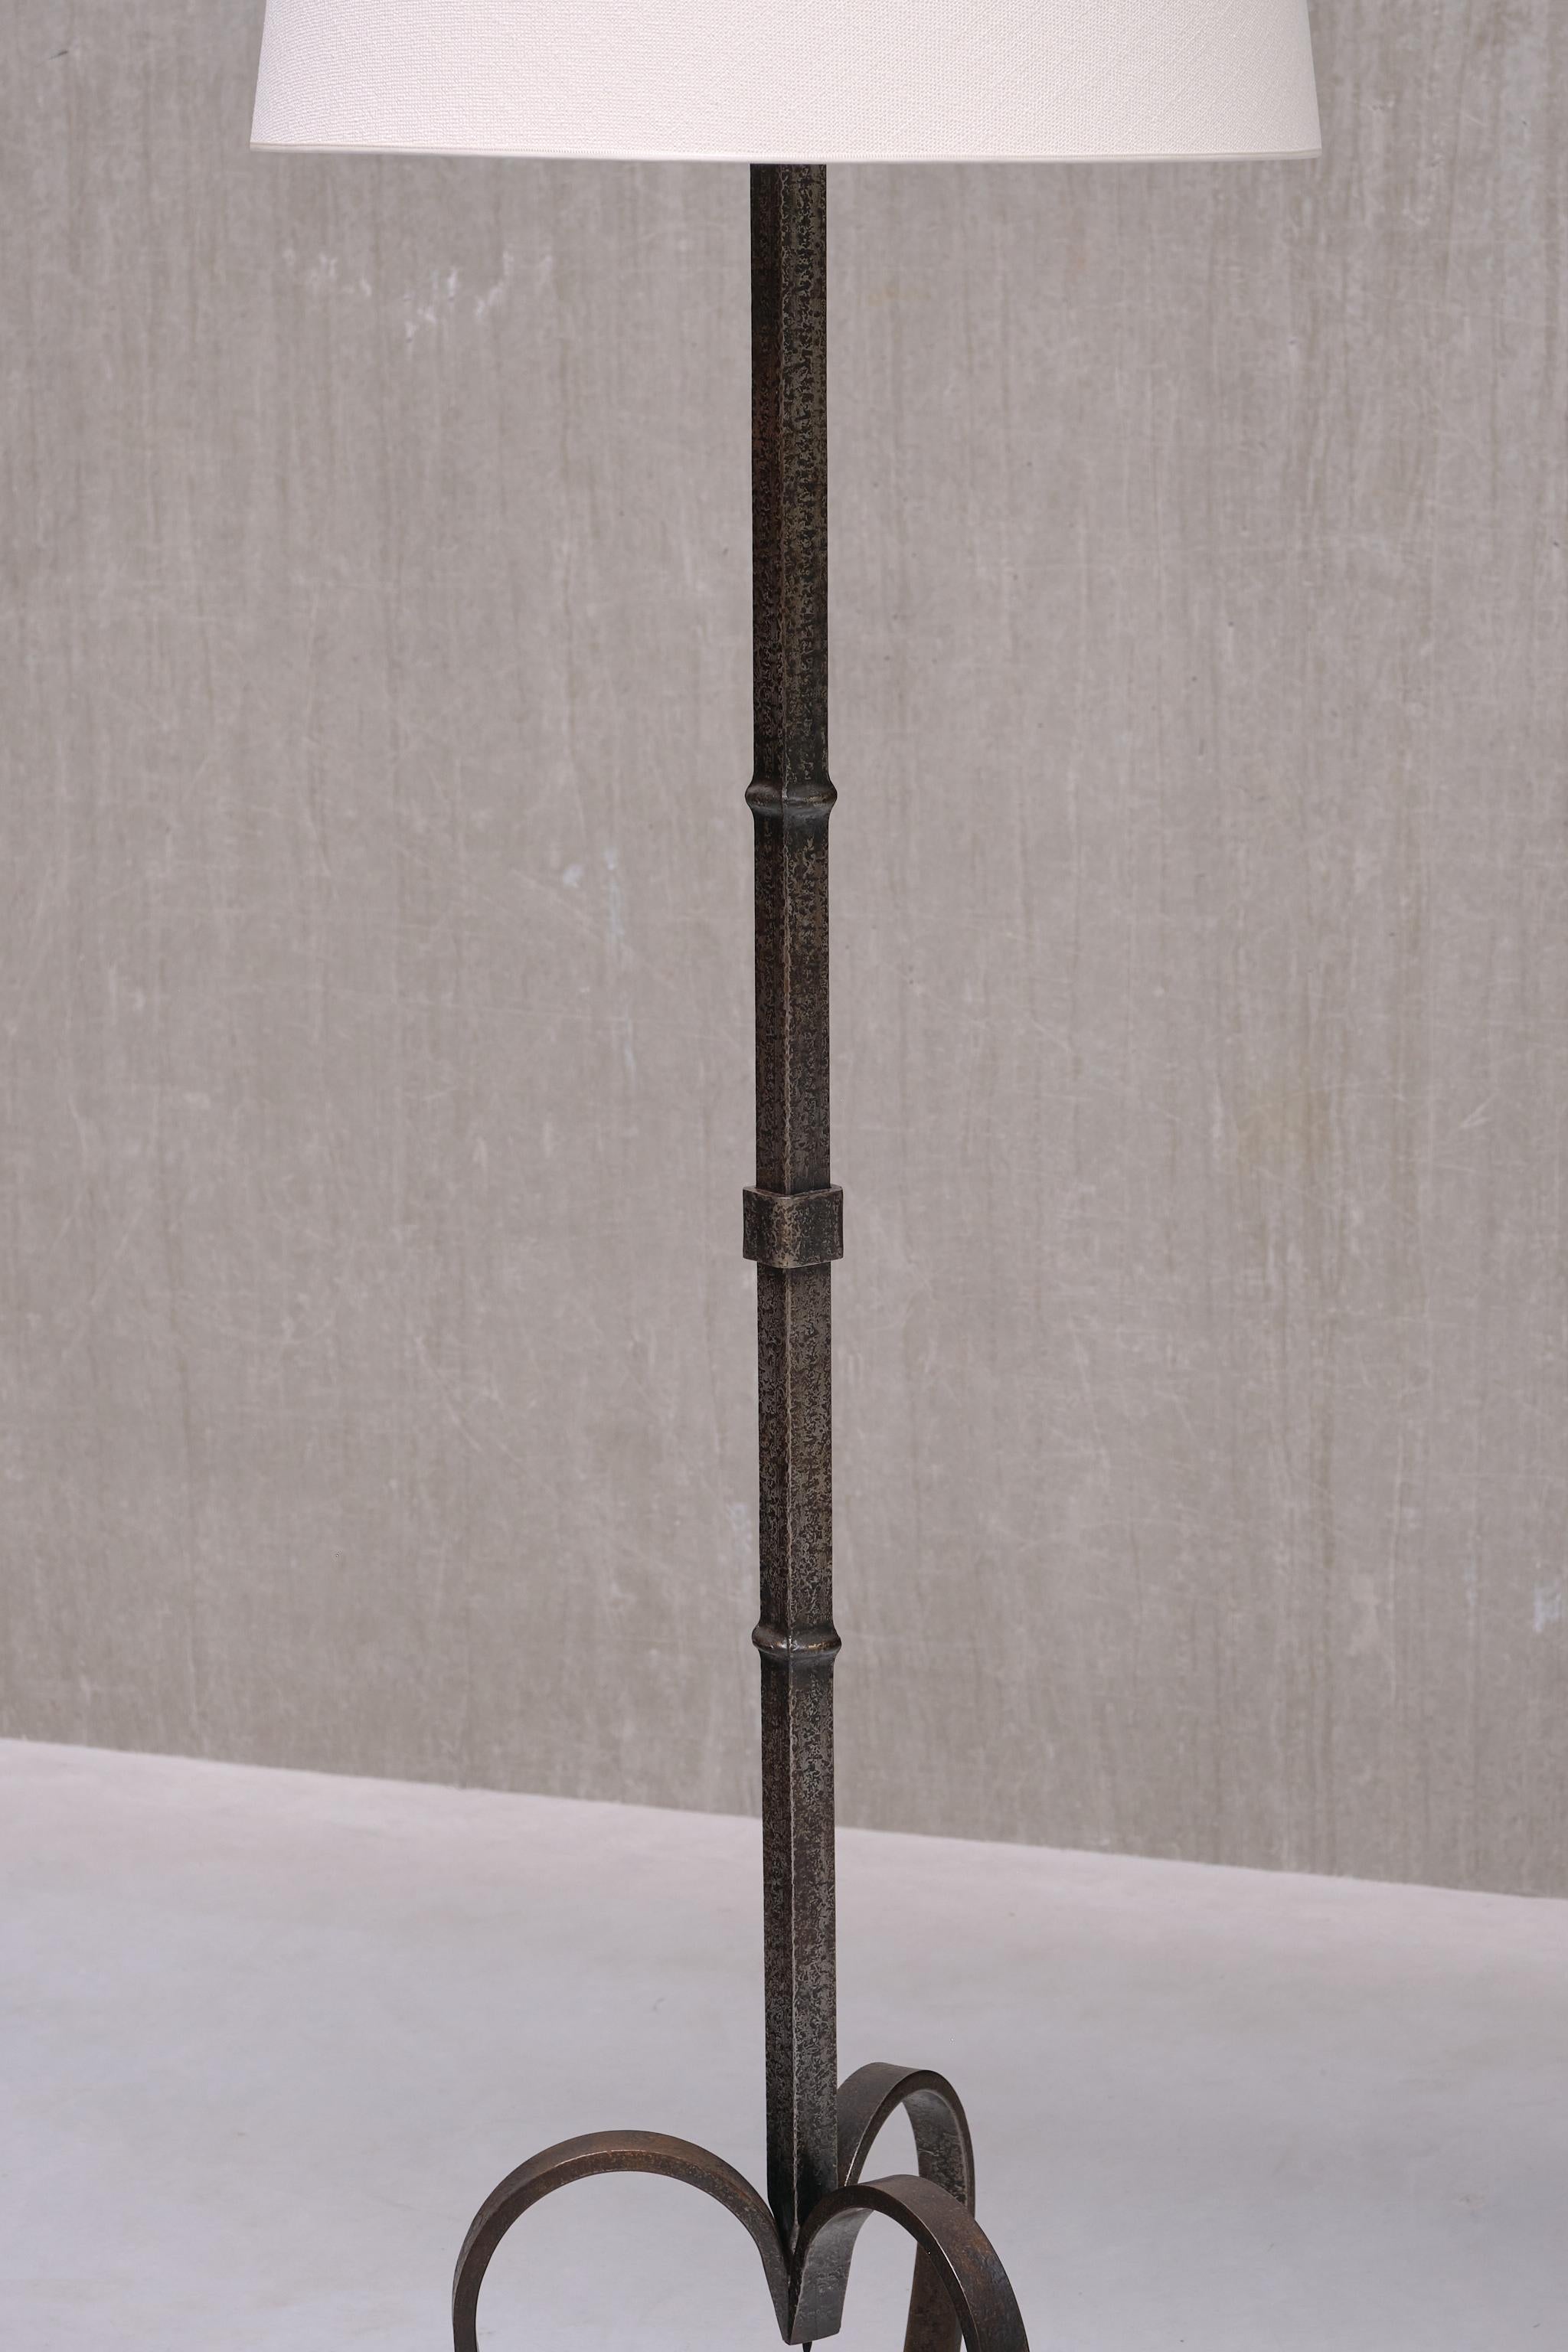 Sculptural French Modern Three Legged Floor Lamp in Wrought Iron, 1950s For Sale 1